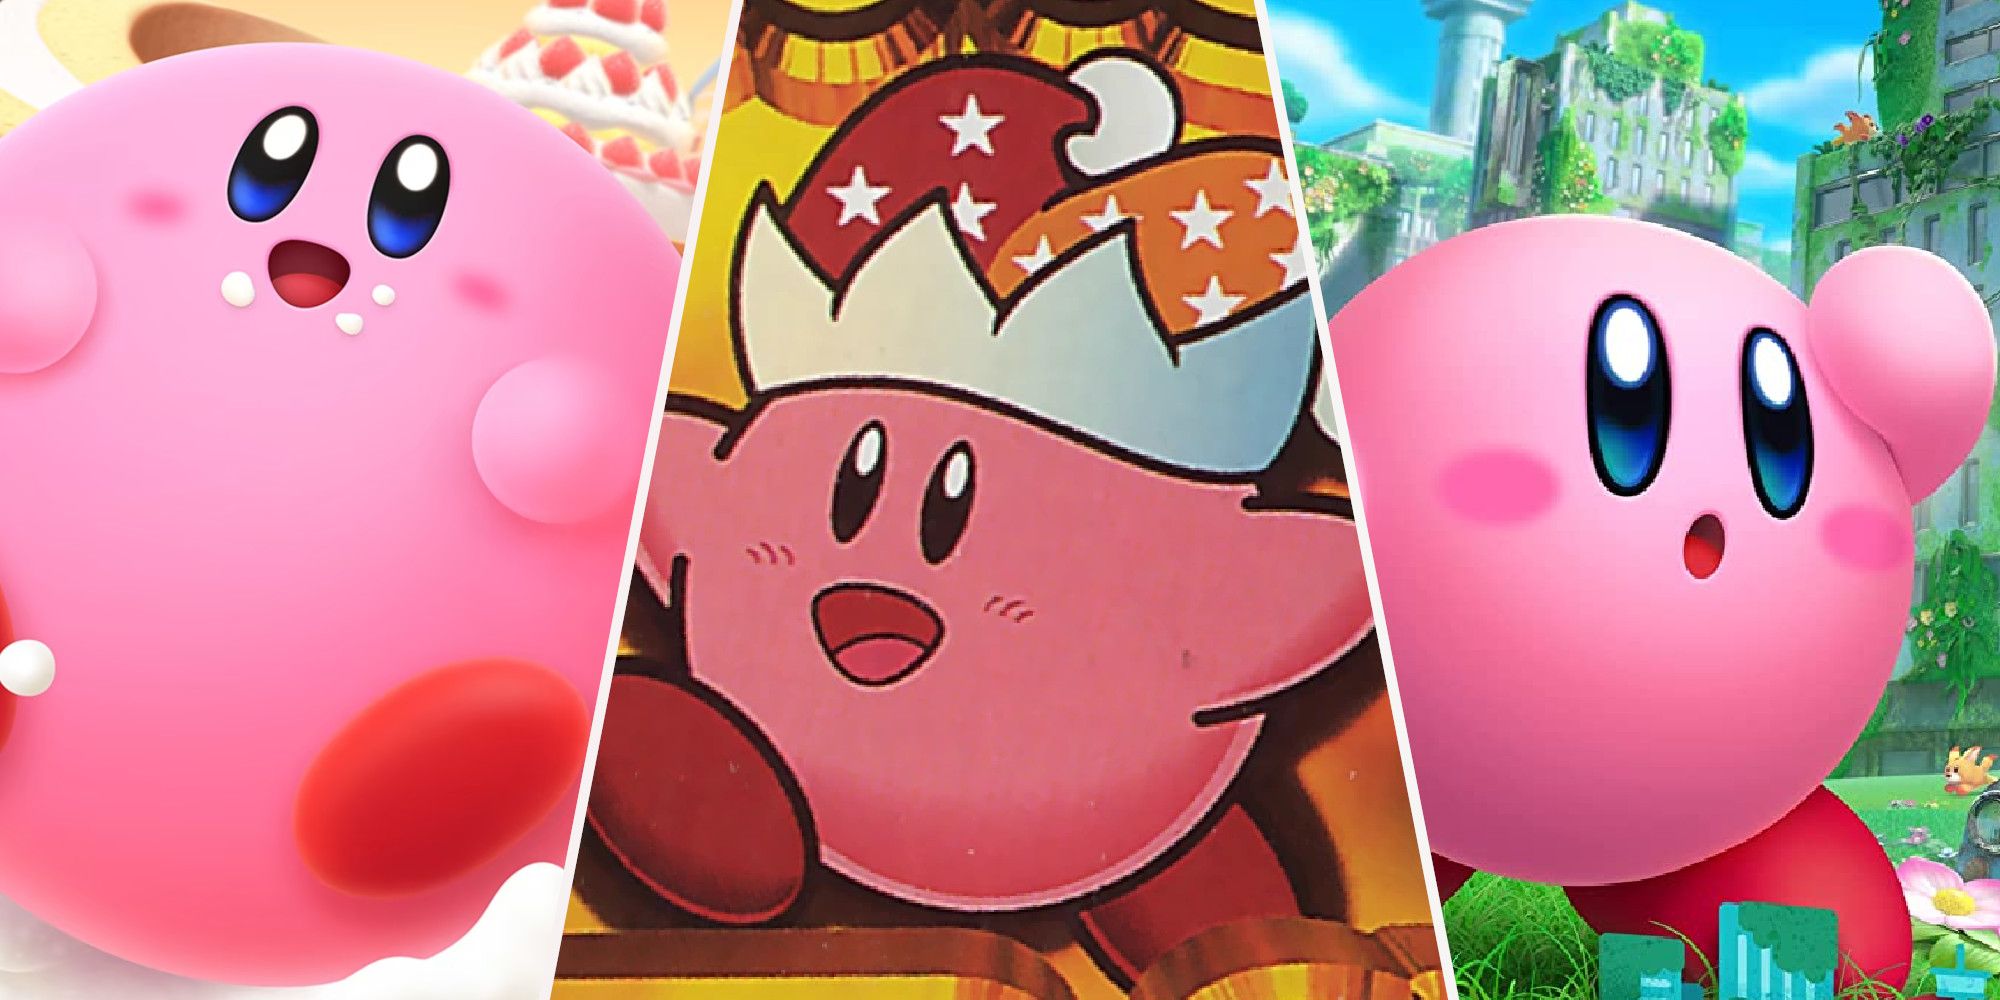 The best Kirby games to adventure through